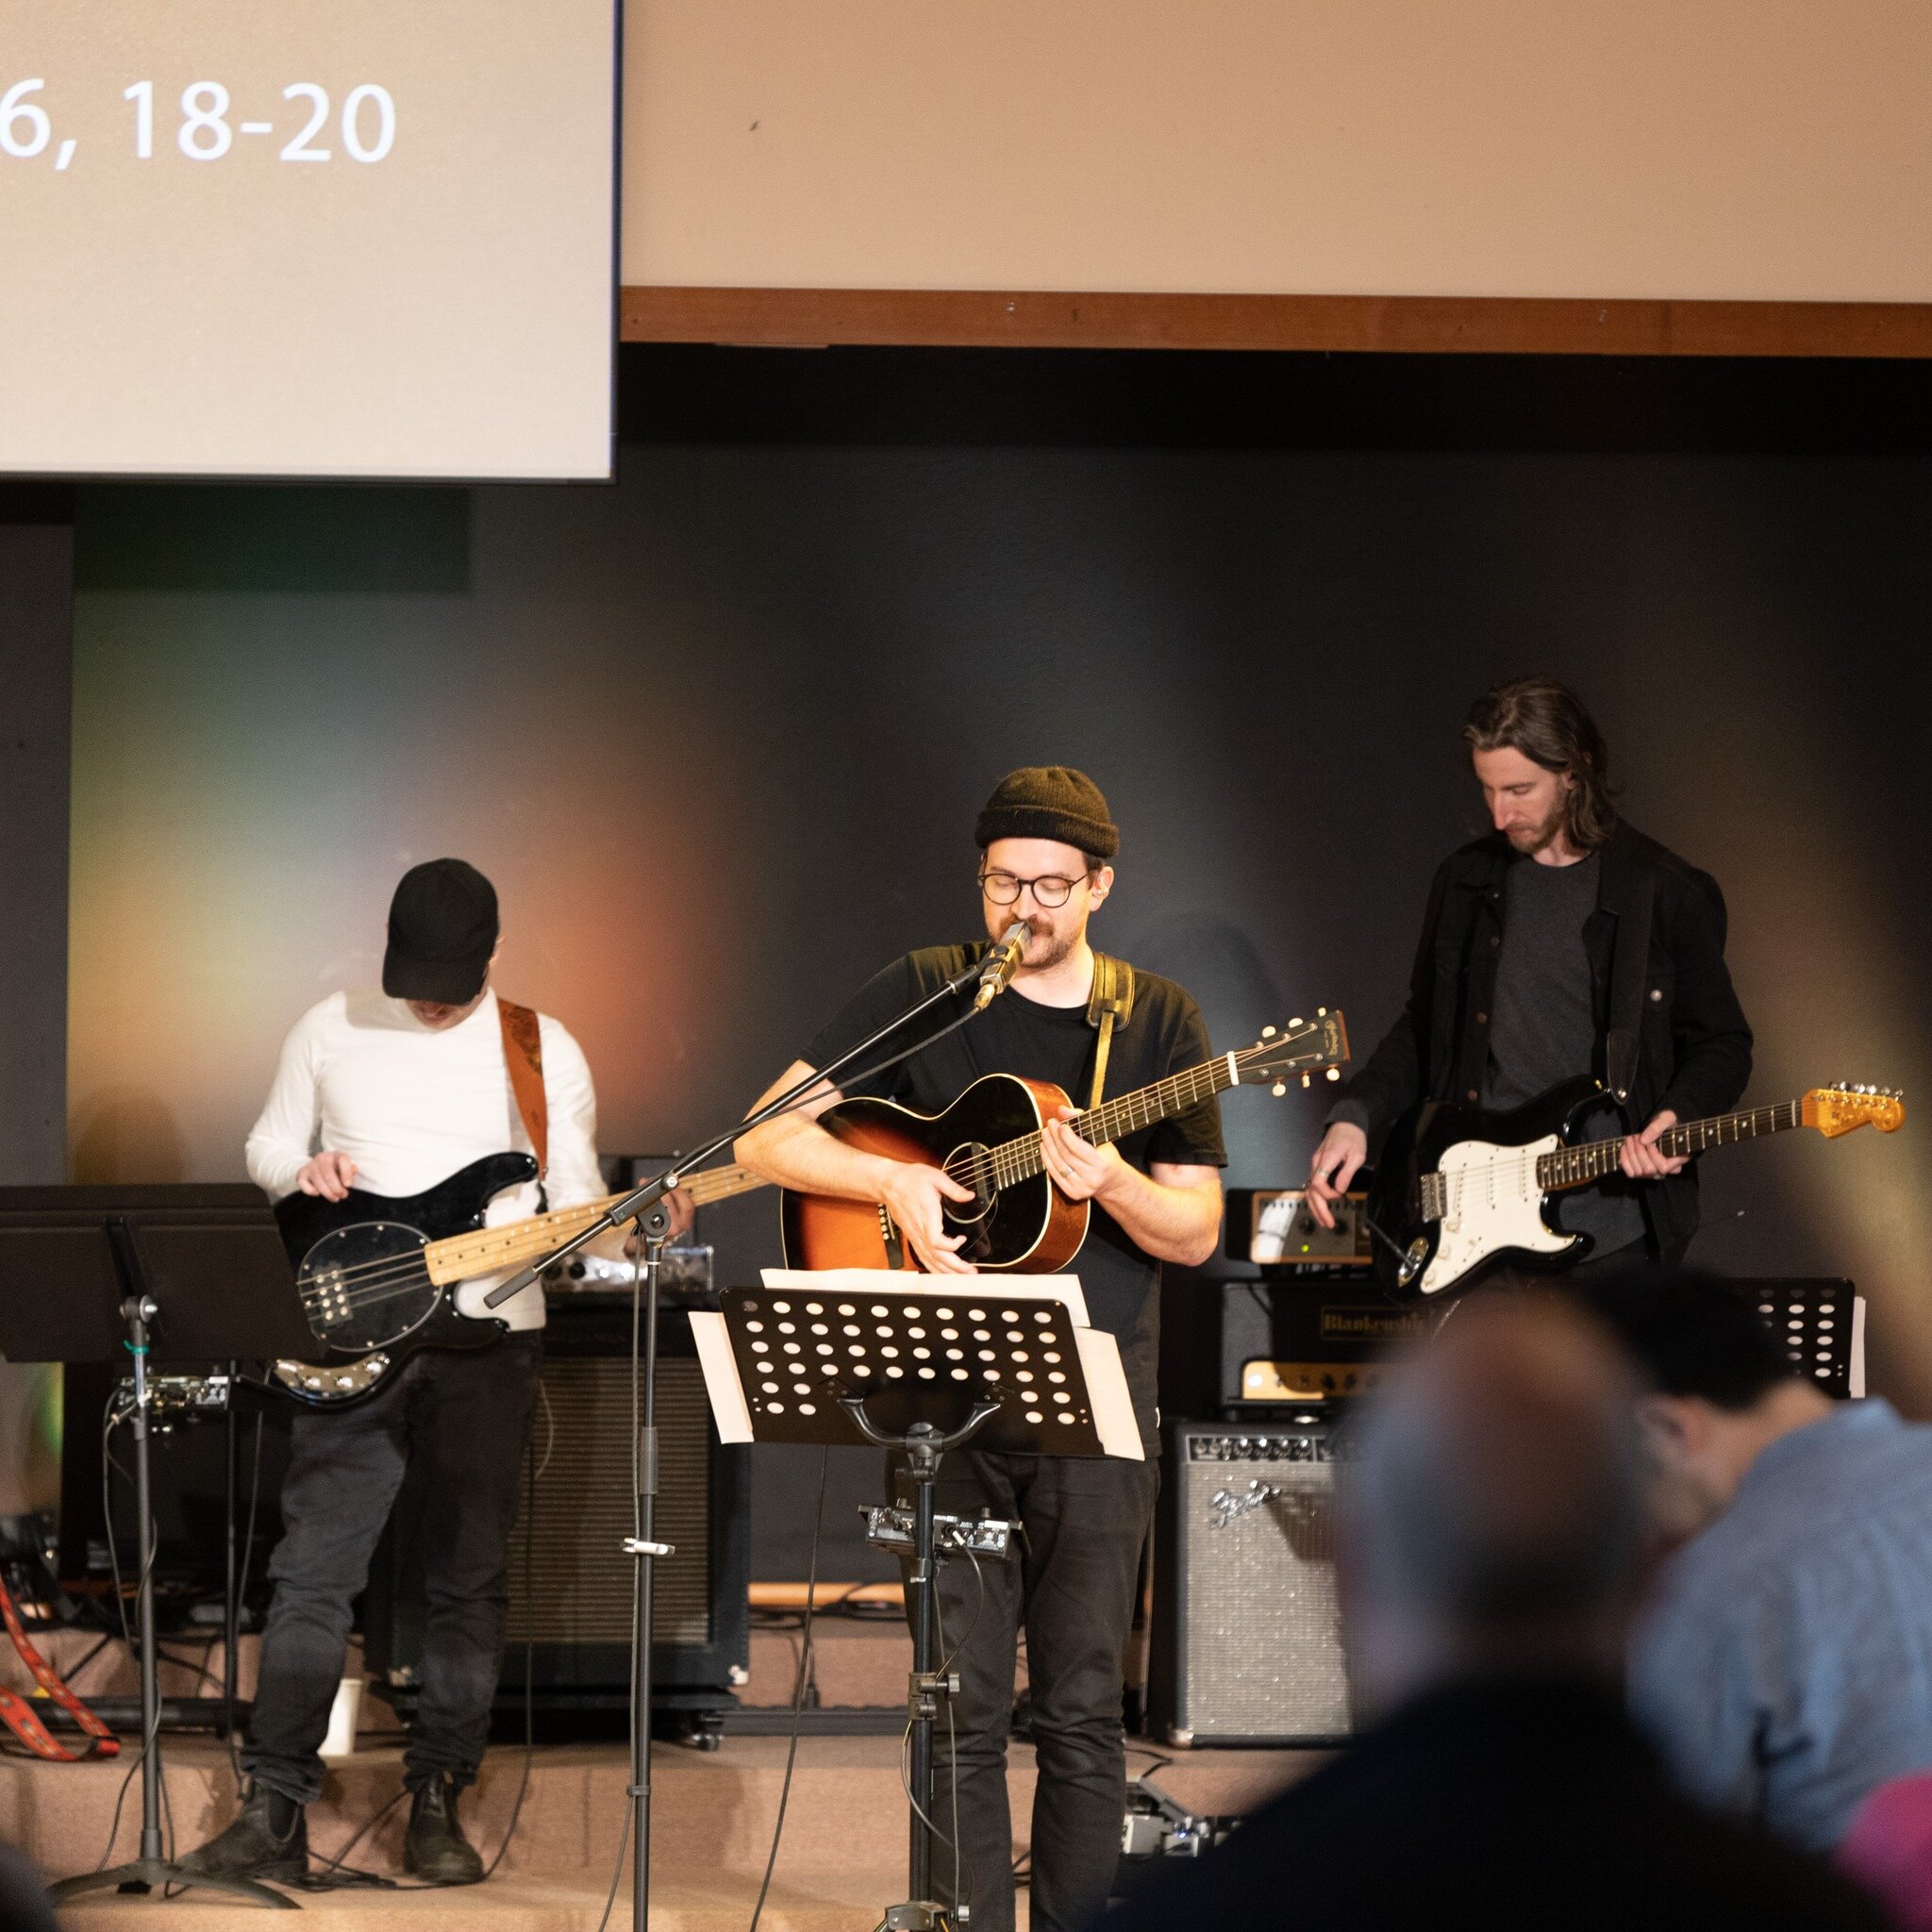 Come worship with us this weekend!

+ Sunday, May 7 @ 9 + 11am
+ Midtown Church (6060 Culloden St, Vancouver)

midtownchurch.com/sunday

#midtown #midtownchurch #vancouver